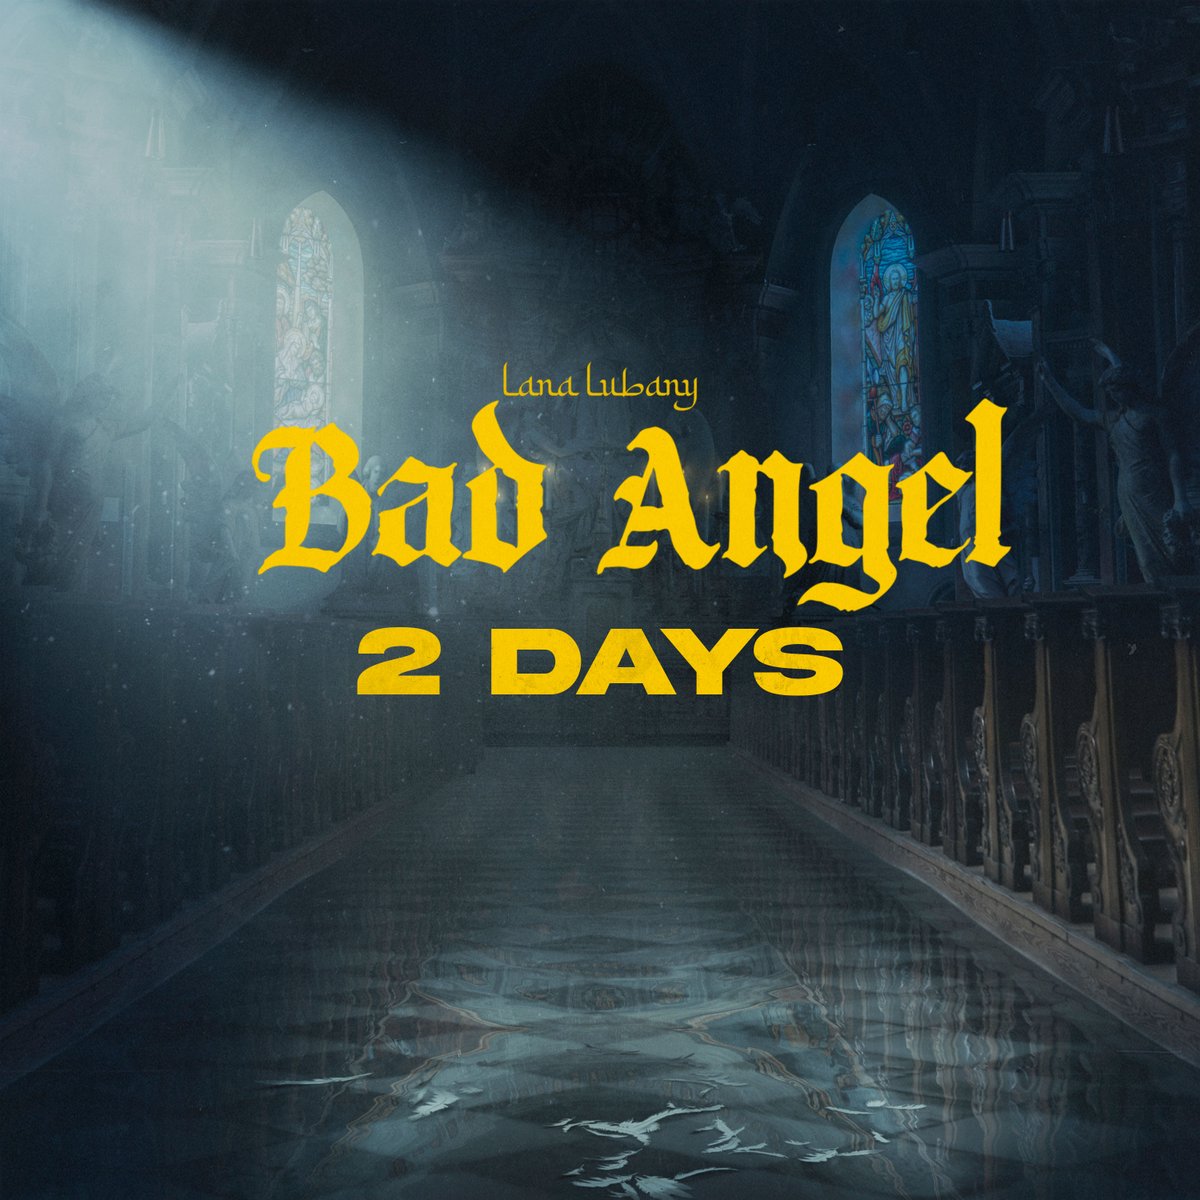 Two more days until Bad Angel is yours. Can’t wait! Pre-save here bit.ly/BadAngelPresave
#newsingle #newsinglecomingsoon #originalsong #musicsearch #talentsearch #londonmusic #singersofinstagram #londonmusicscene #musiclife #independentmusic #independentartist #artistdevelopment